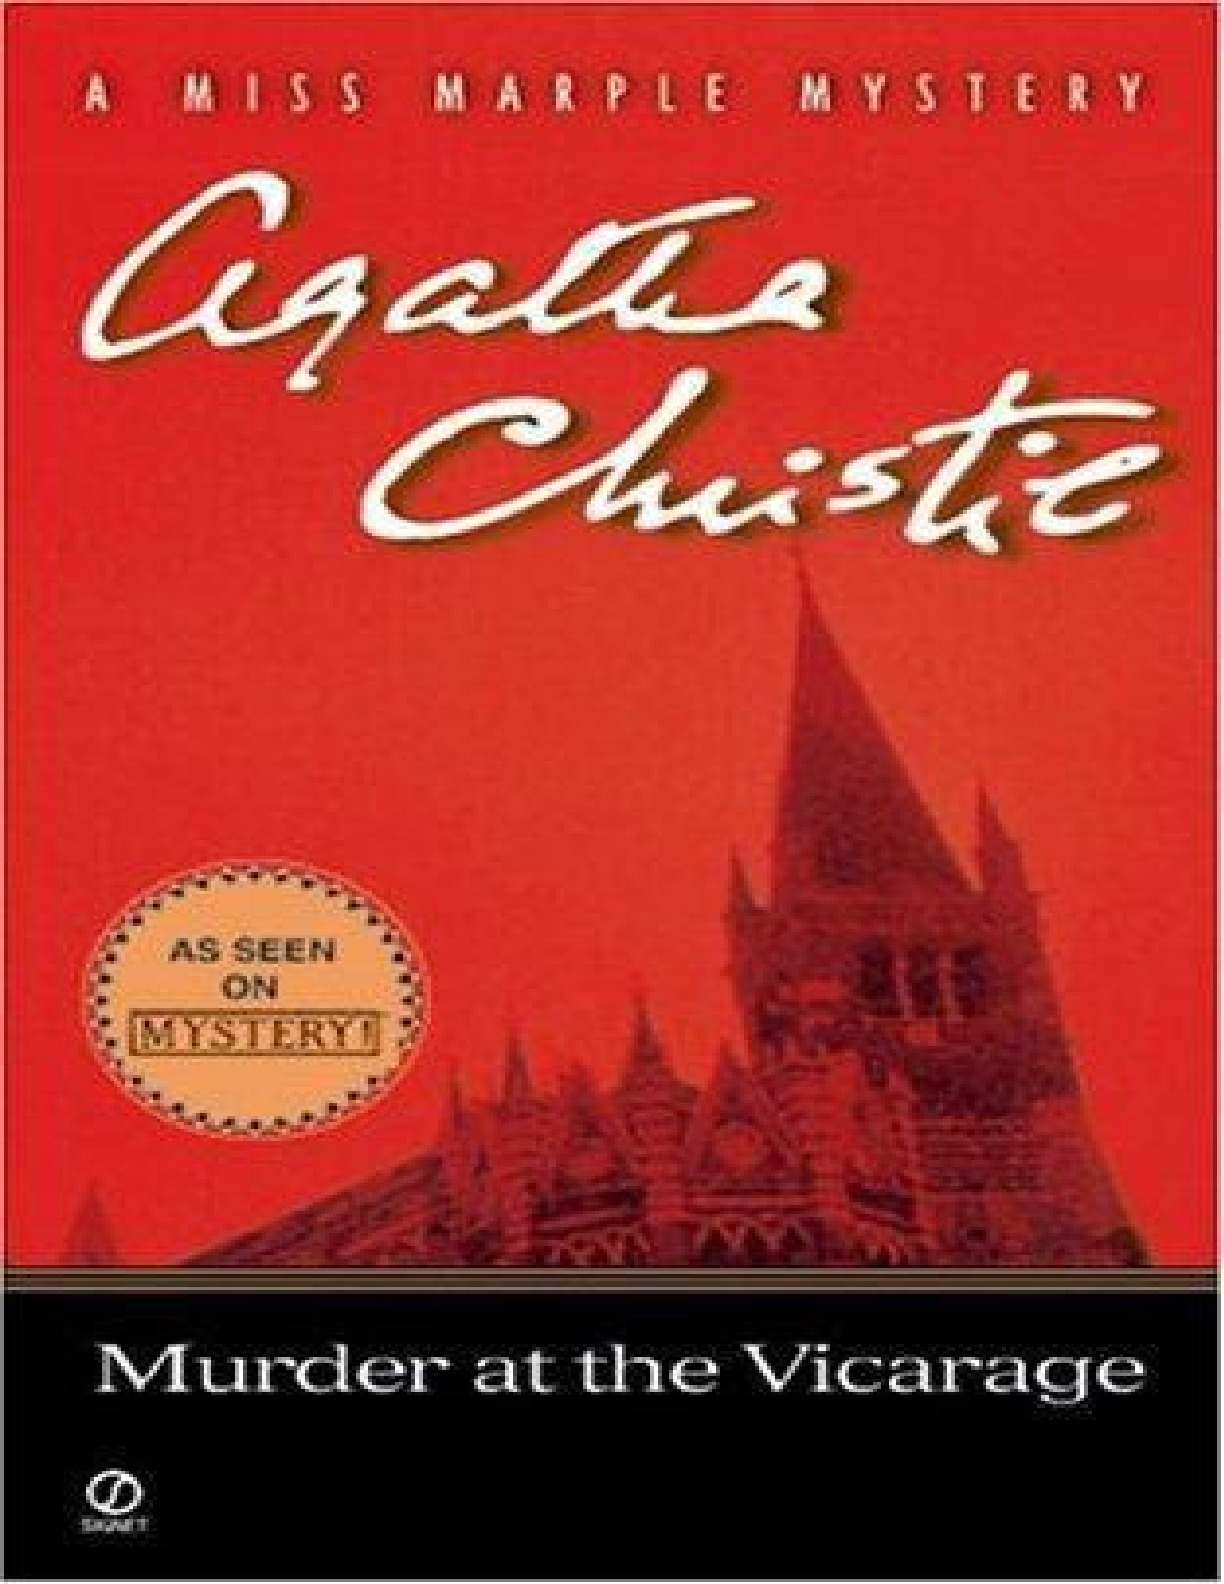 Murder at the vicarage – Agatha Christie